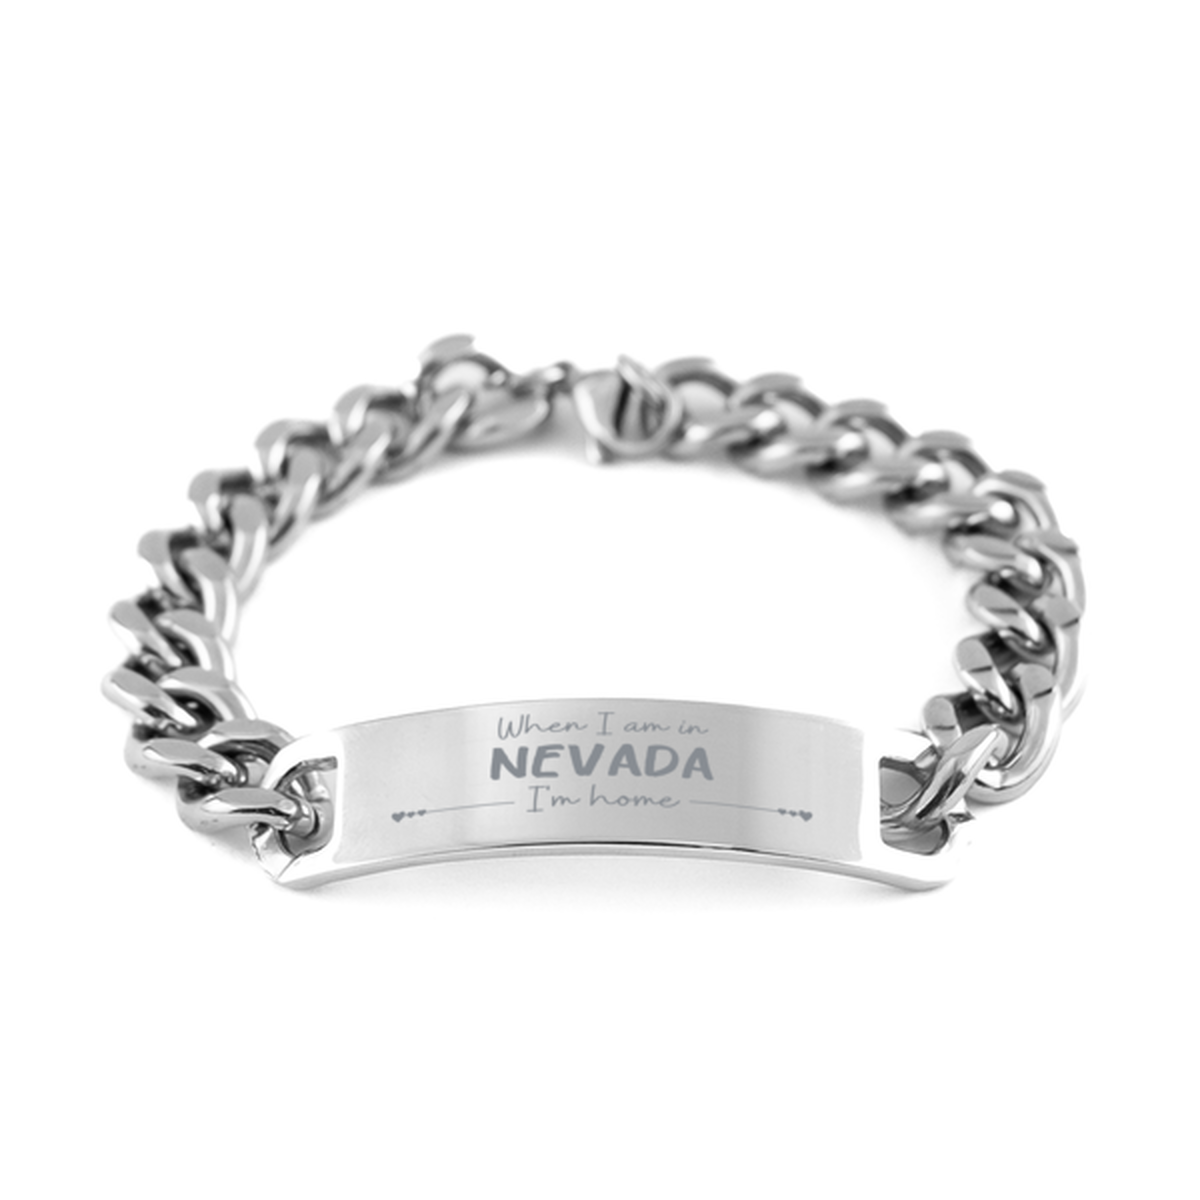 When I am in Nevada I'm home Cuban Chain Stainless Steel Bracelet, Cheap Gifts For Nevada, State Nevada Birthday Gifts for Friends Coworker